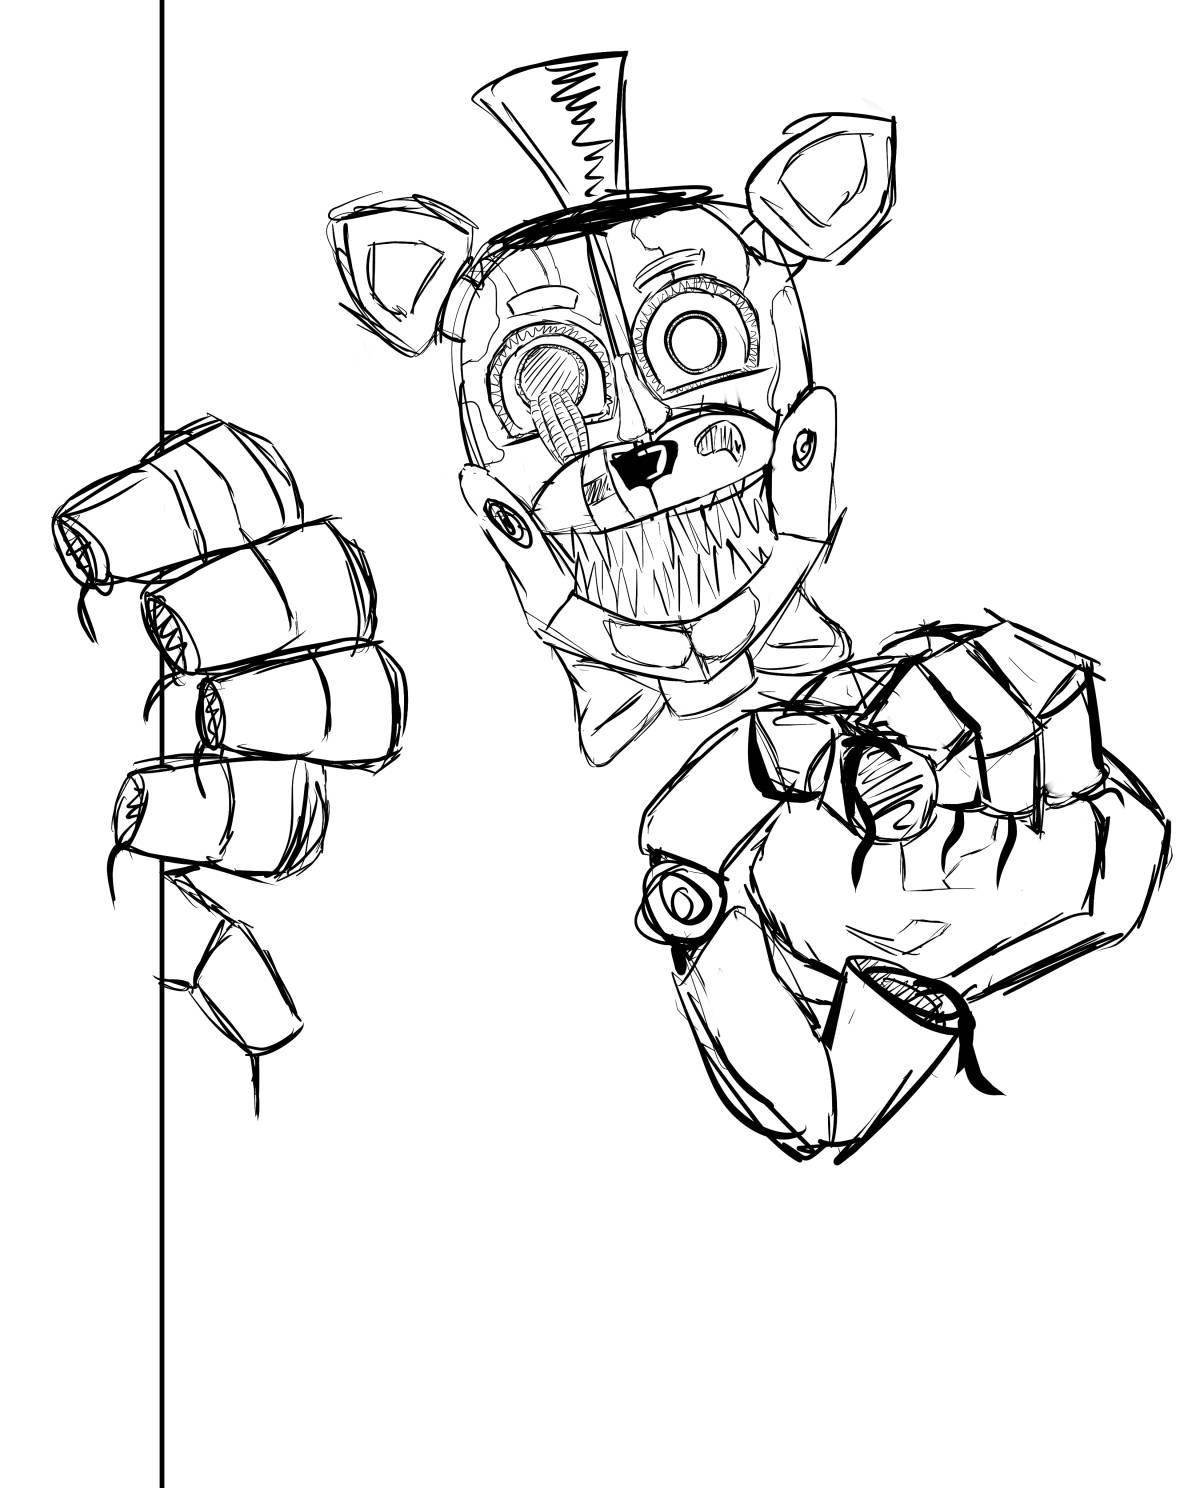 Quirky coloring springtrap animatronic